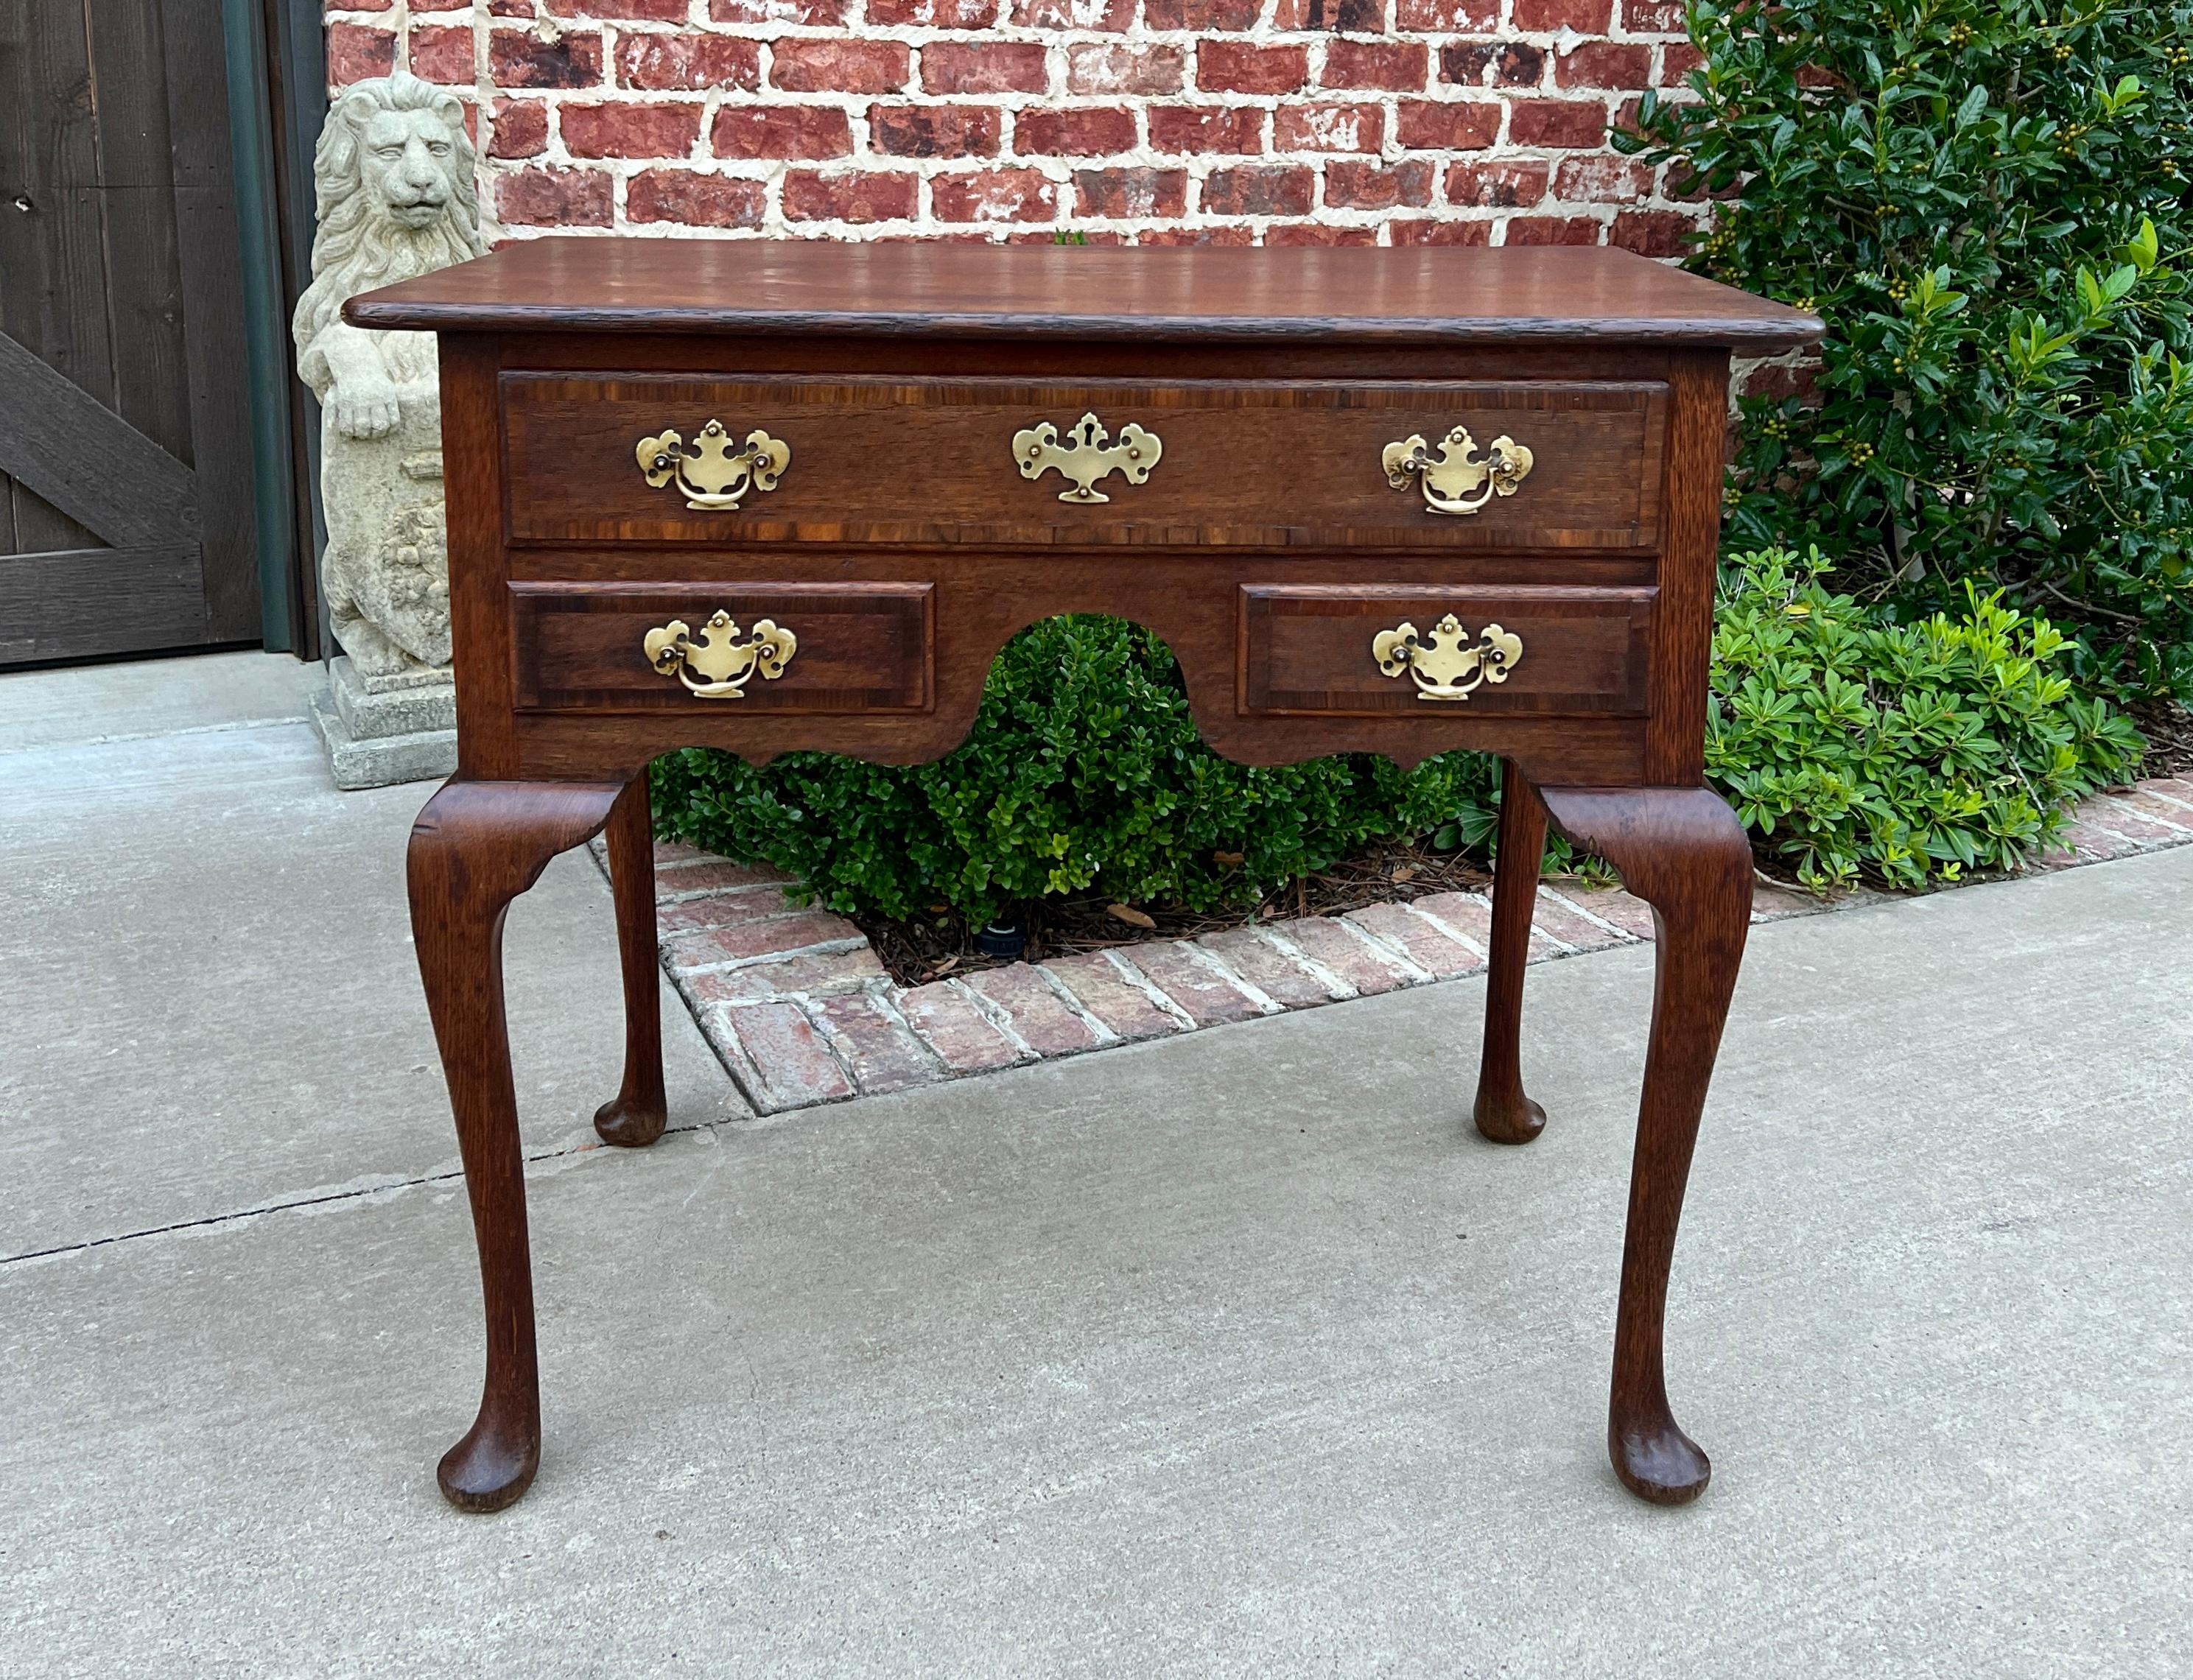 19th Century Antique English Georgian Table Small Desk Nightstand Lowboy 3 Drawers Tiger Oak For Sale